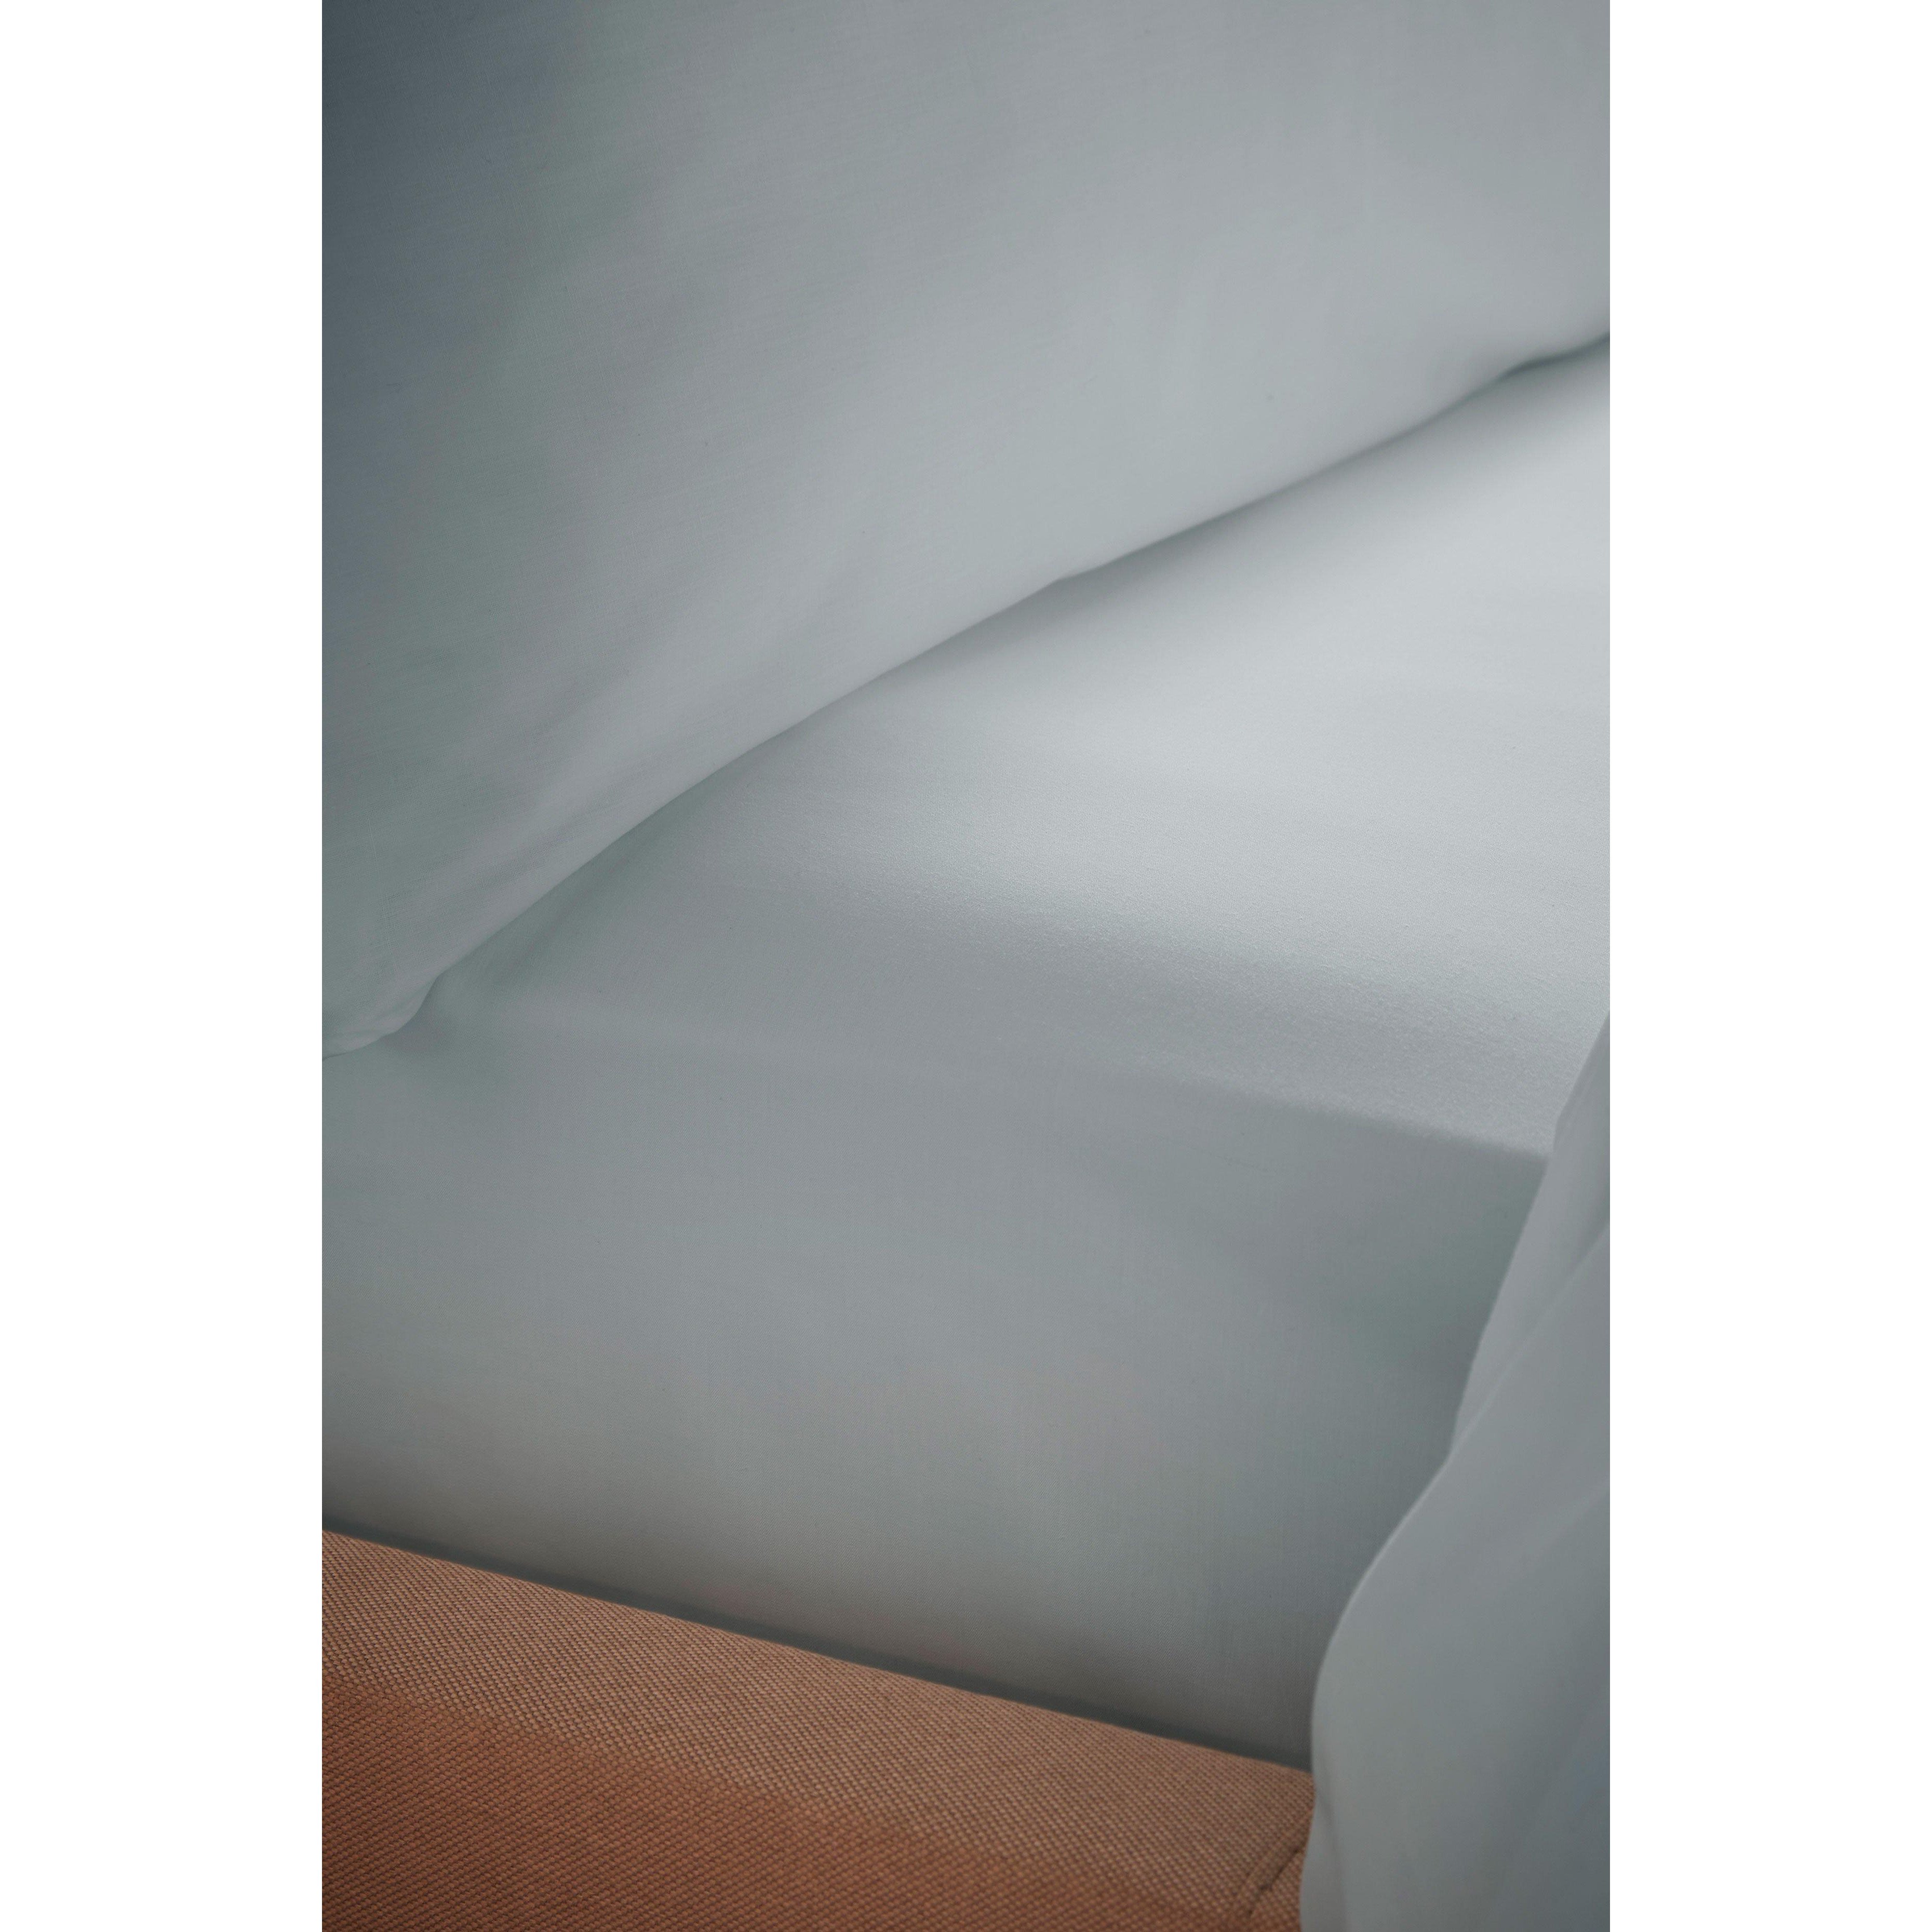 'Temperature Controlling TENCEL Lyocell' Fitted Sheet - image 1